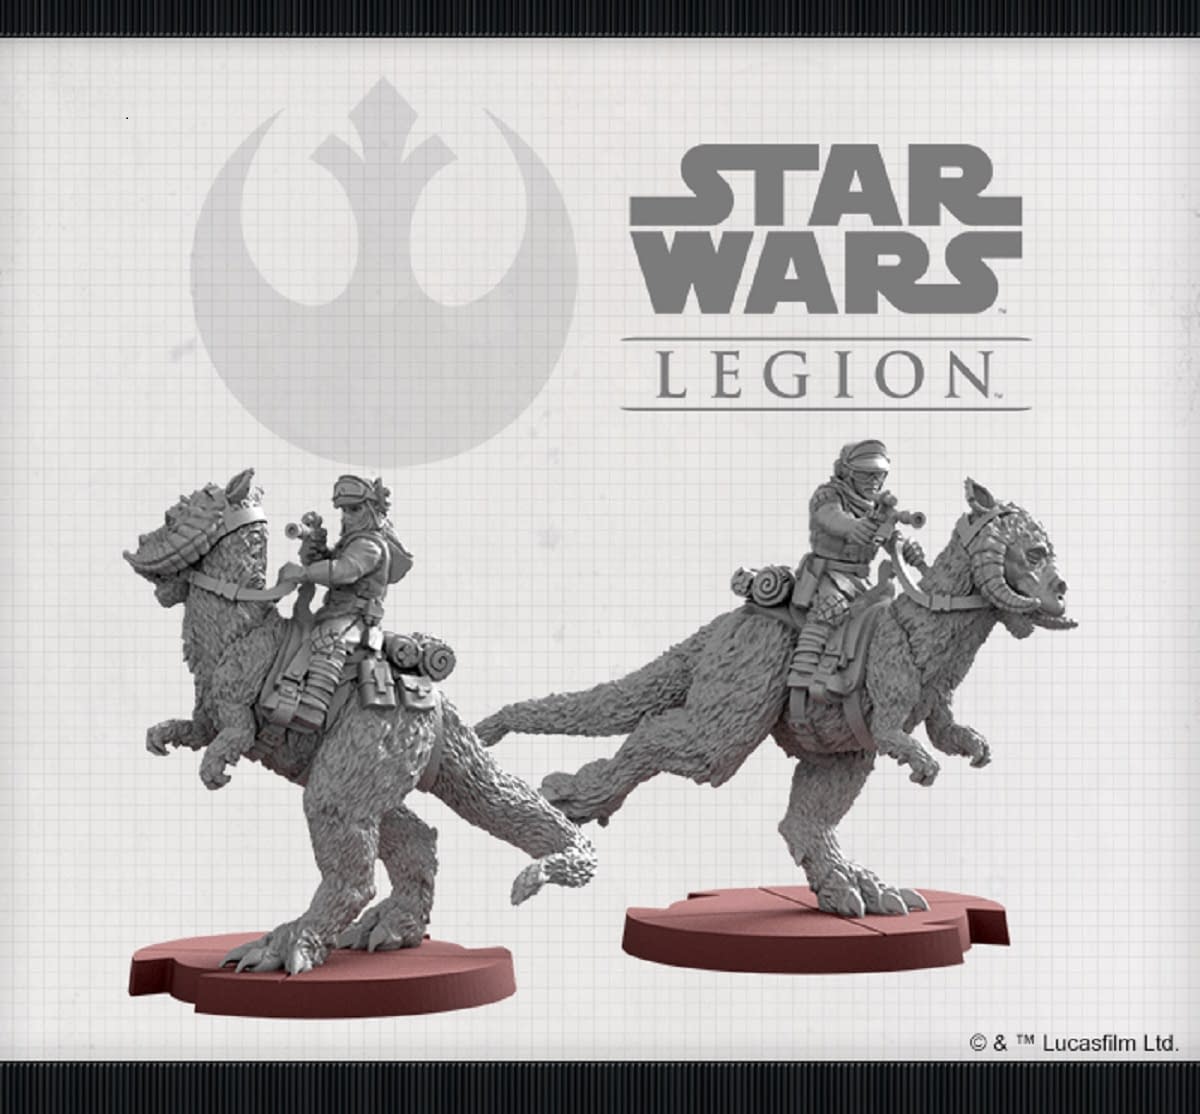 Tauntaun Riders Charge Into Battle for "Star Wars: Legion"